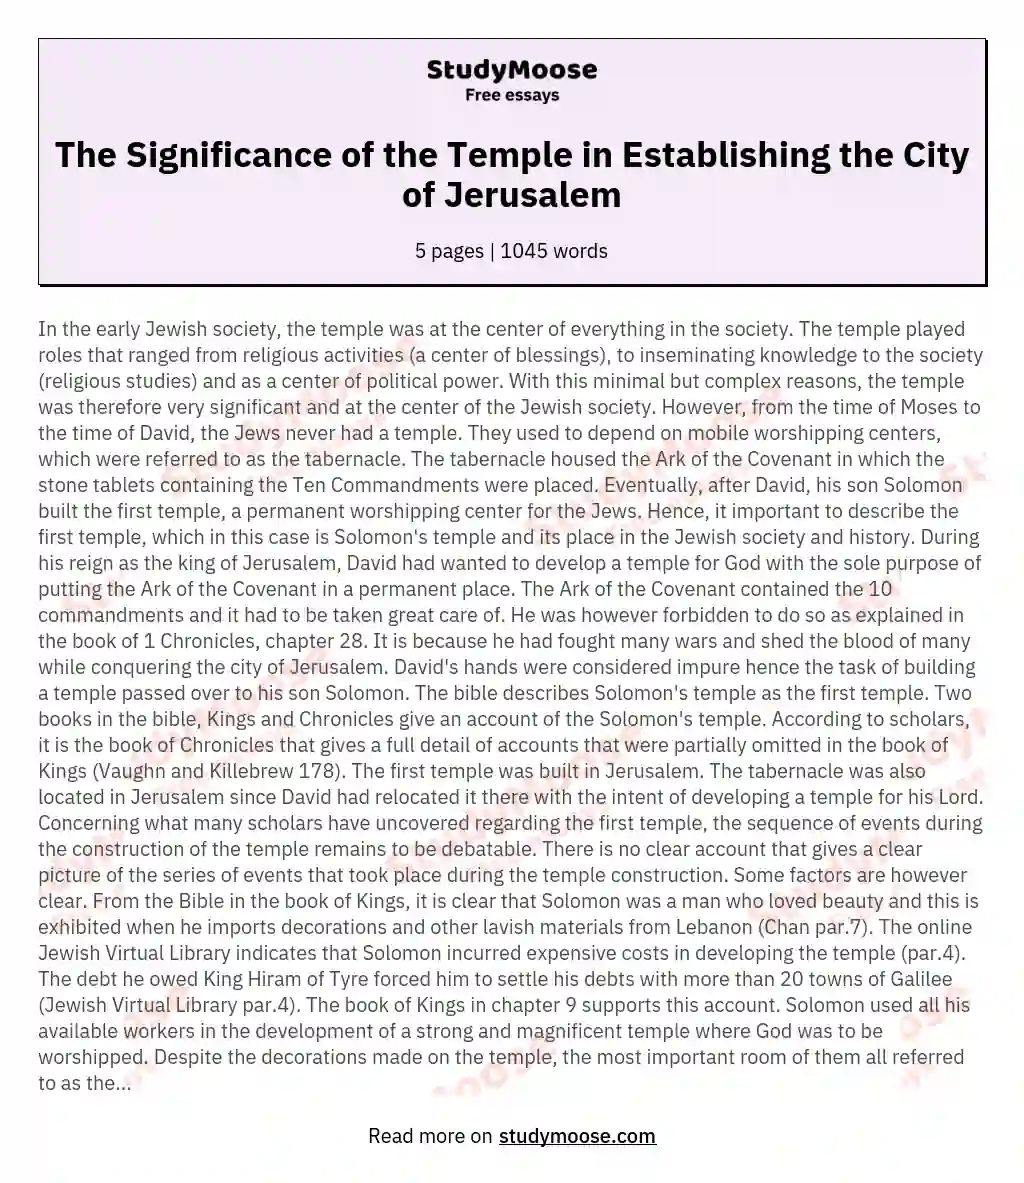 The Significance of the Temple in Establishing the City of Jerusalem essay